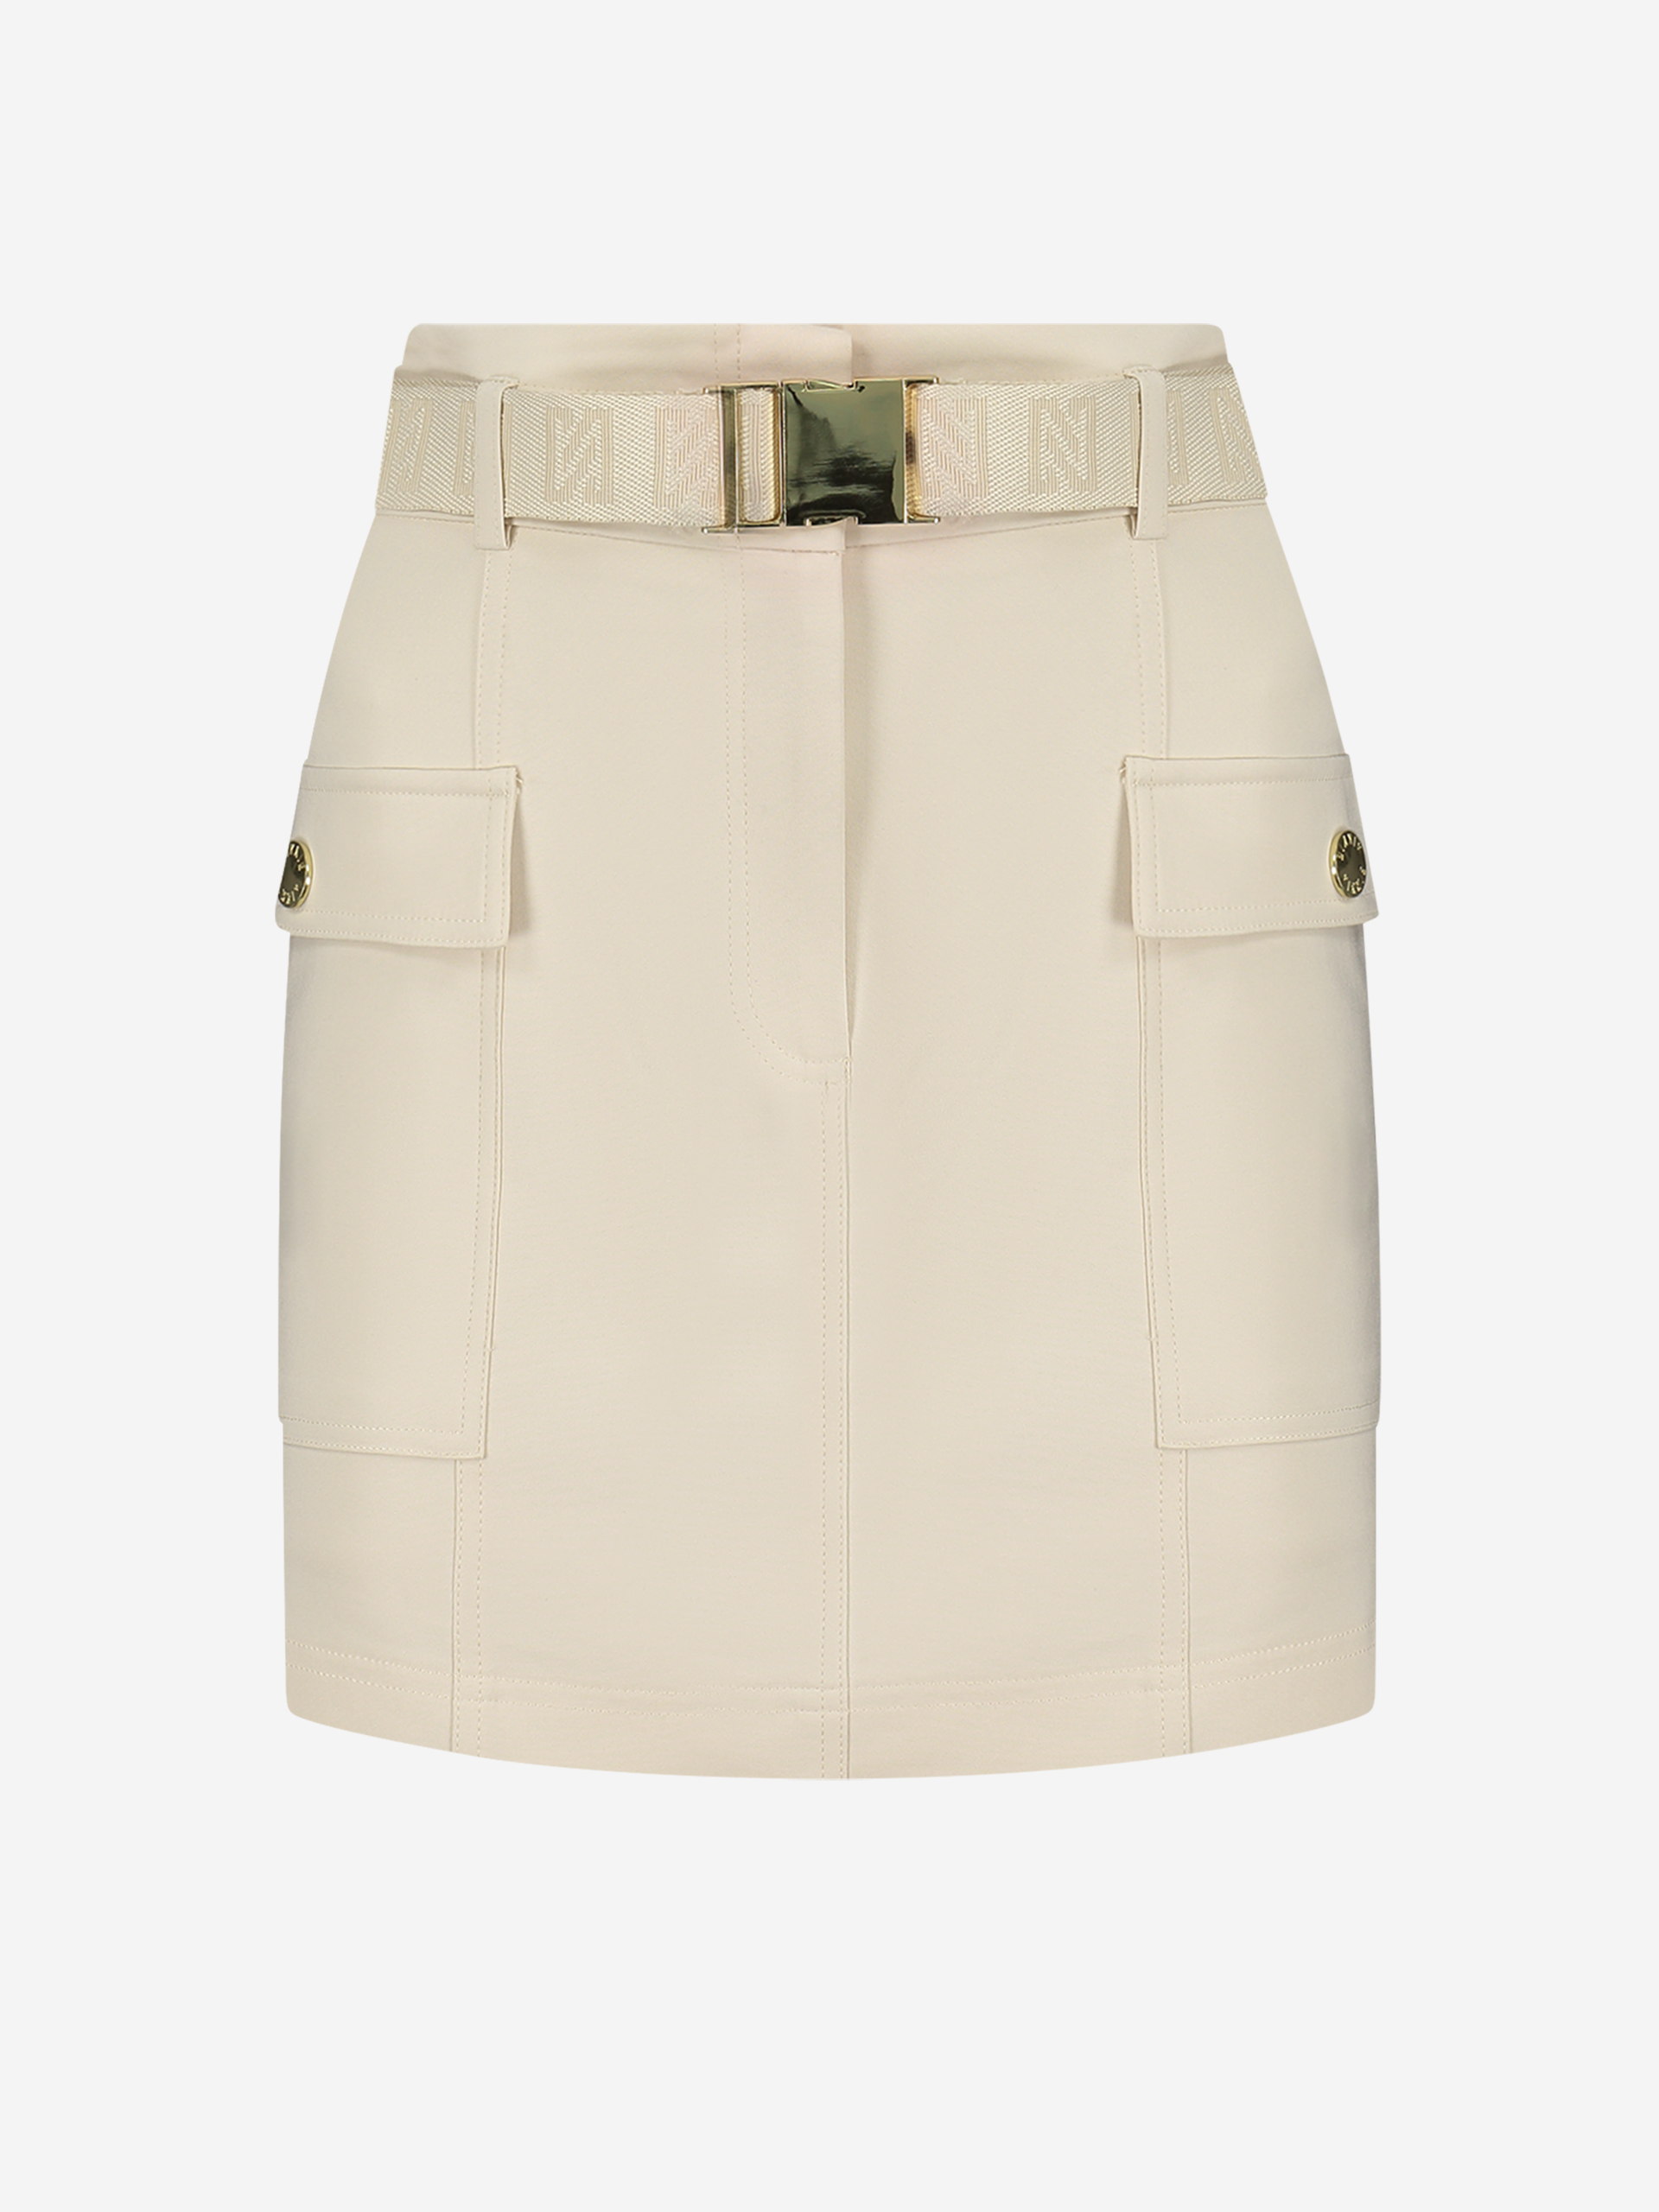 Skirt with pockets and belt